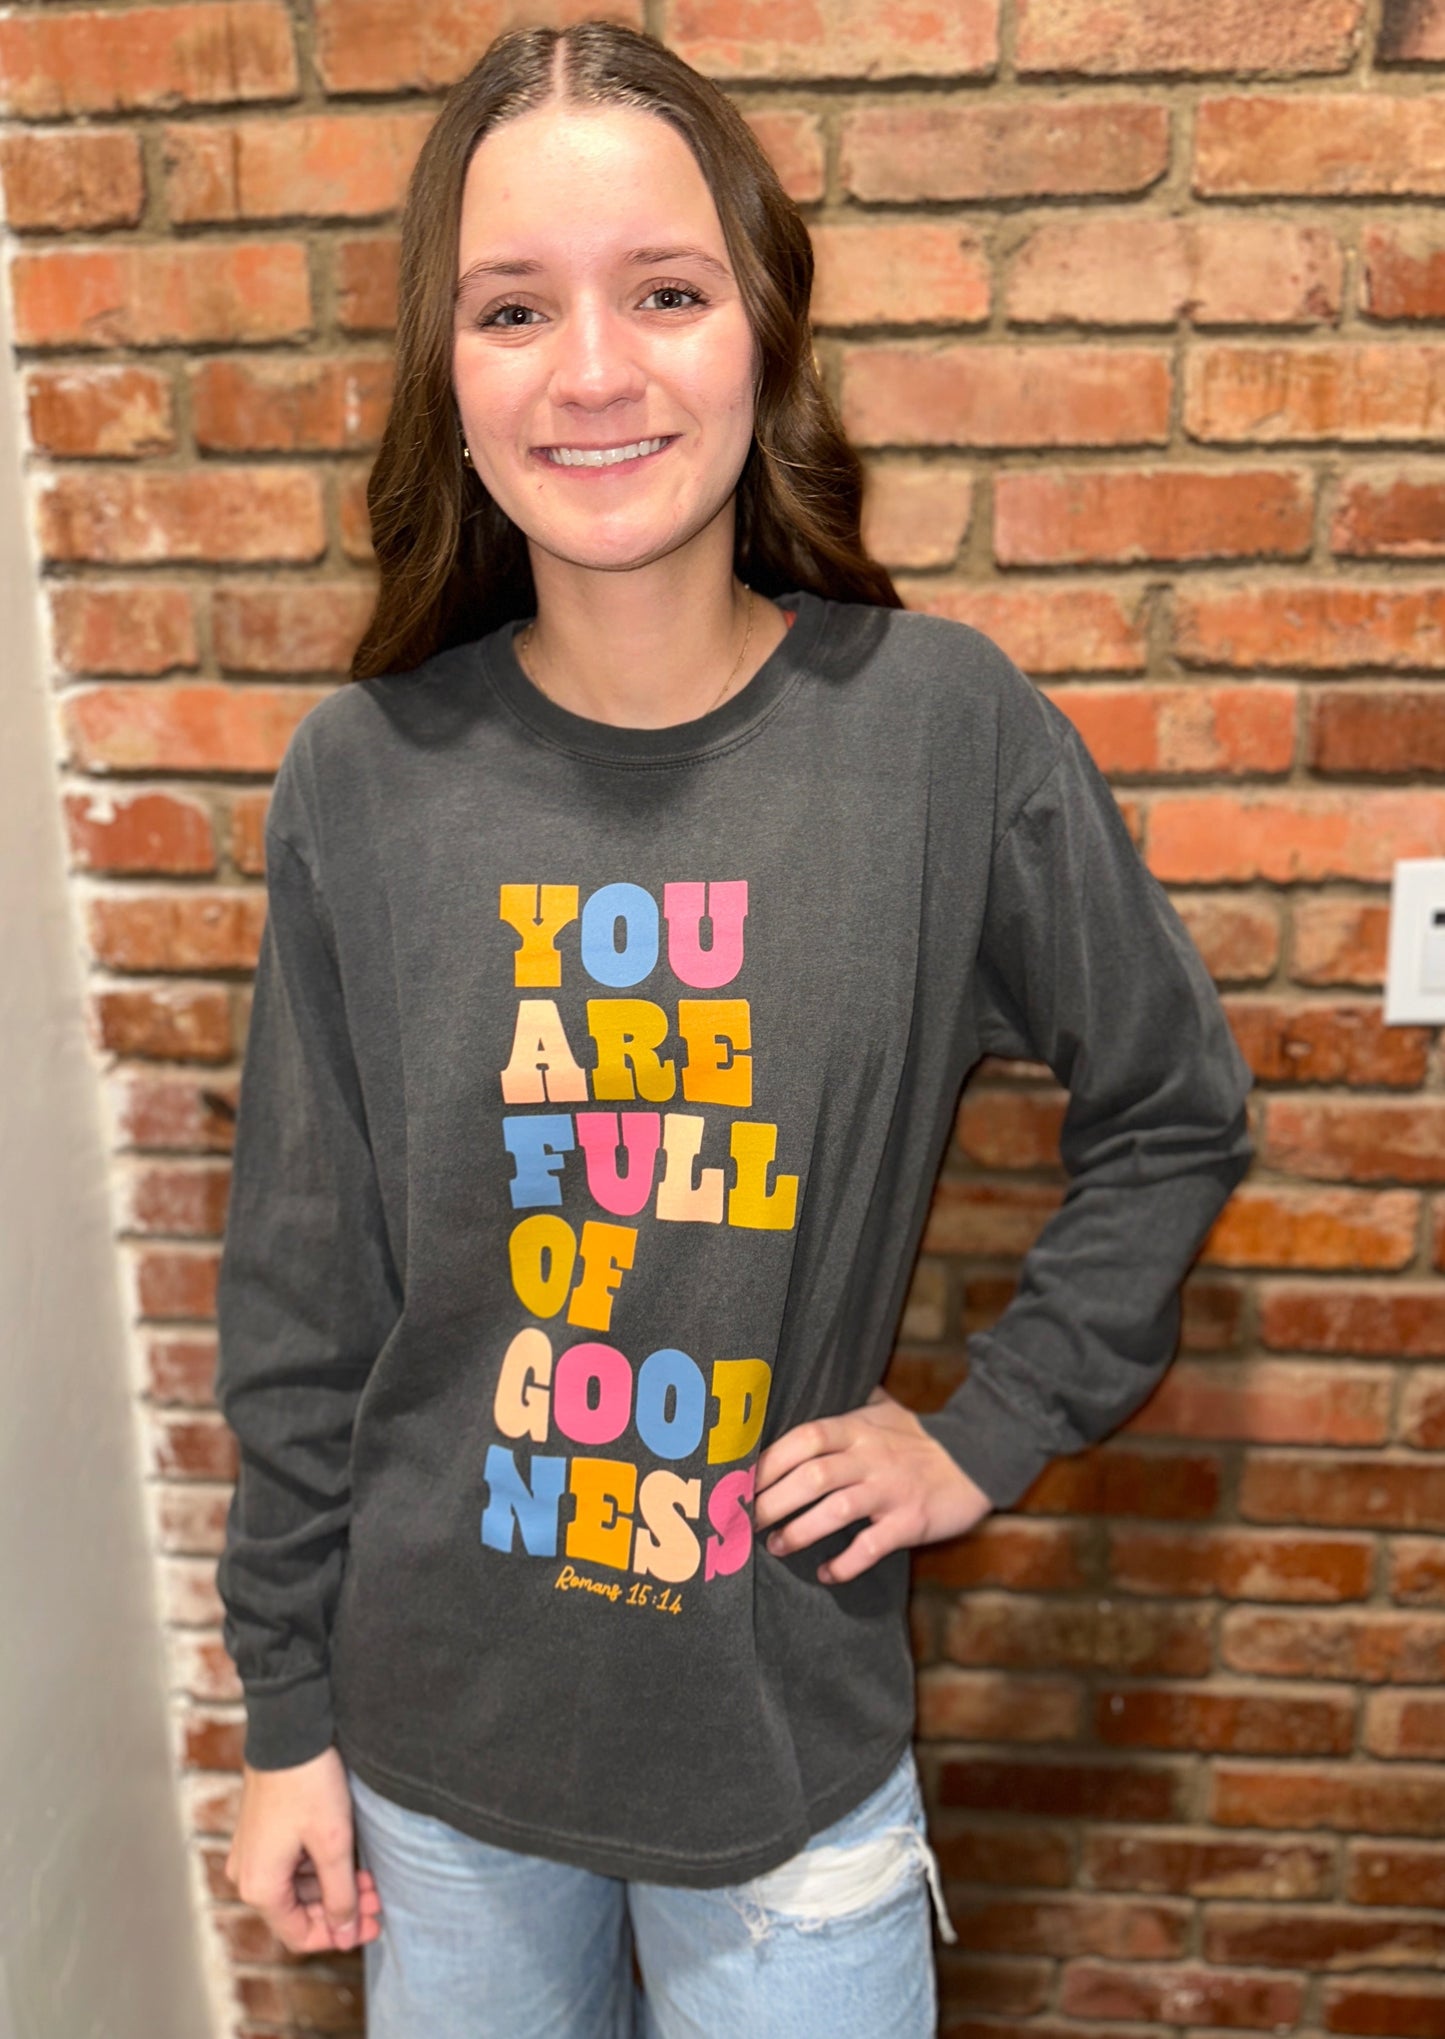 You are full of Goodness long sleeve tee